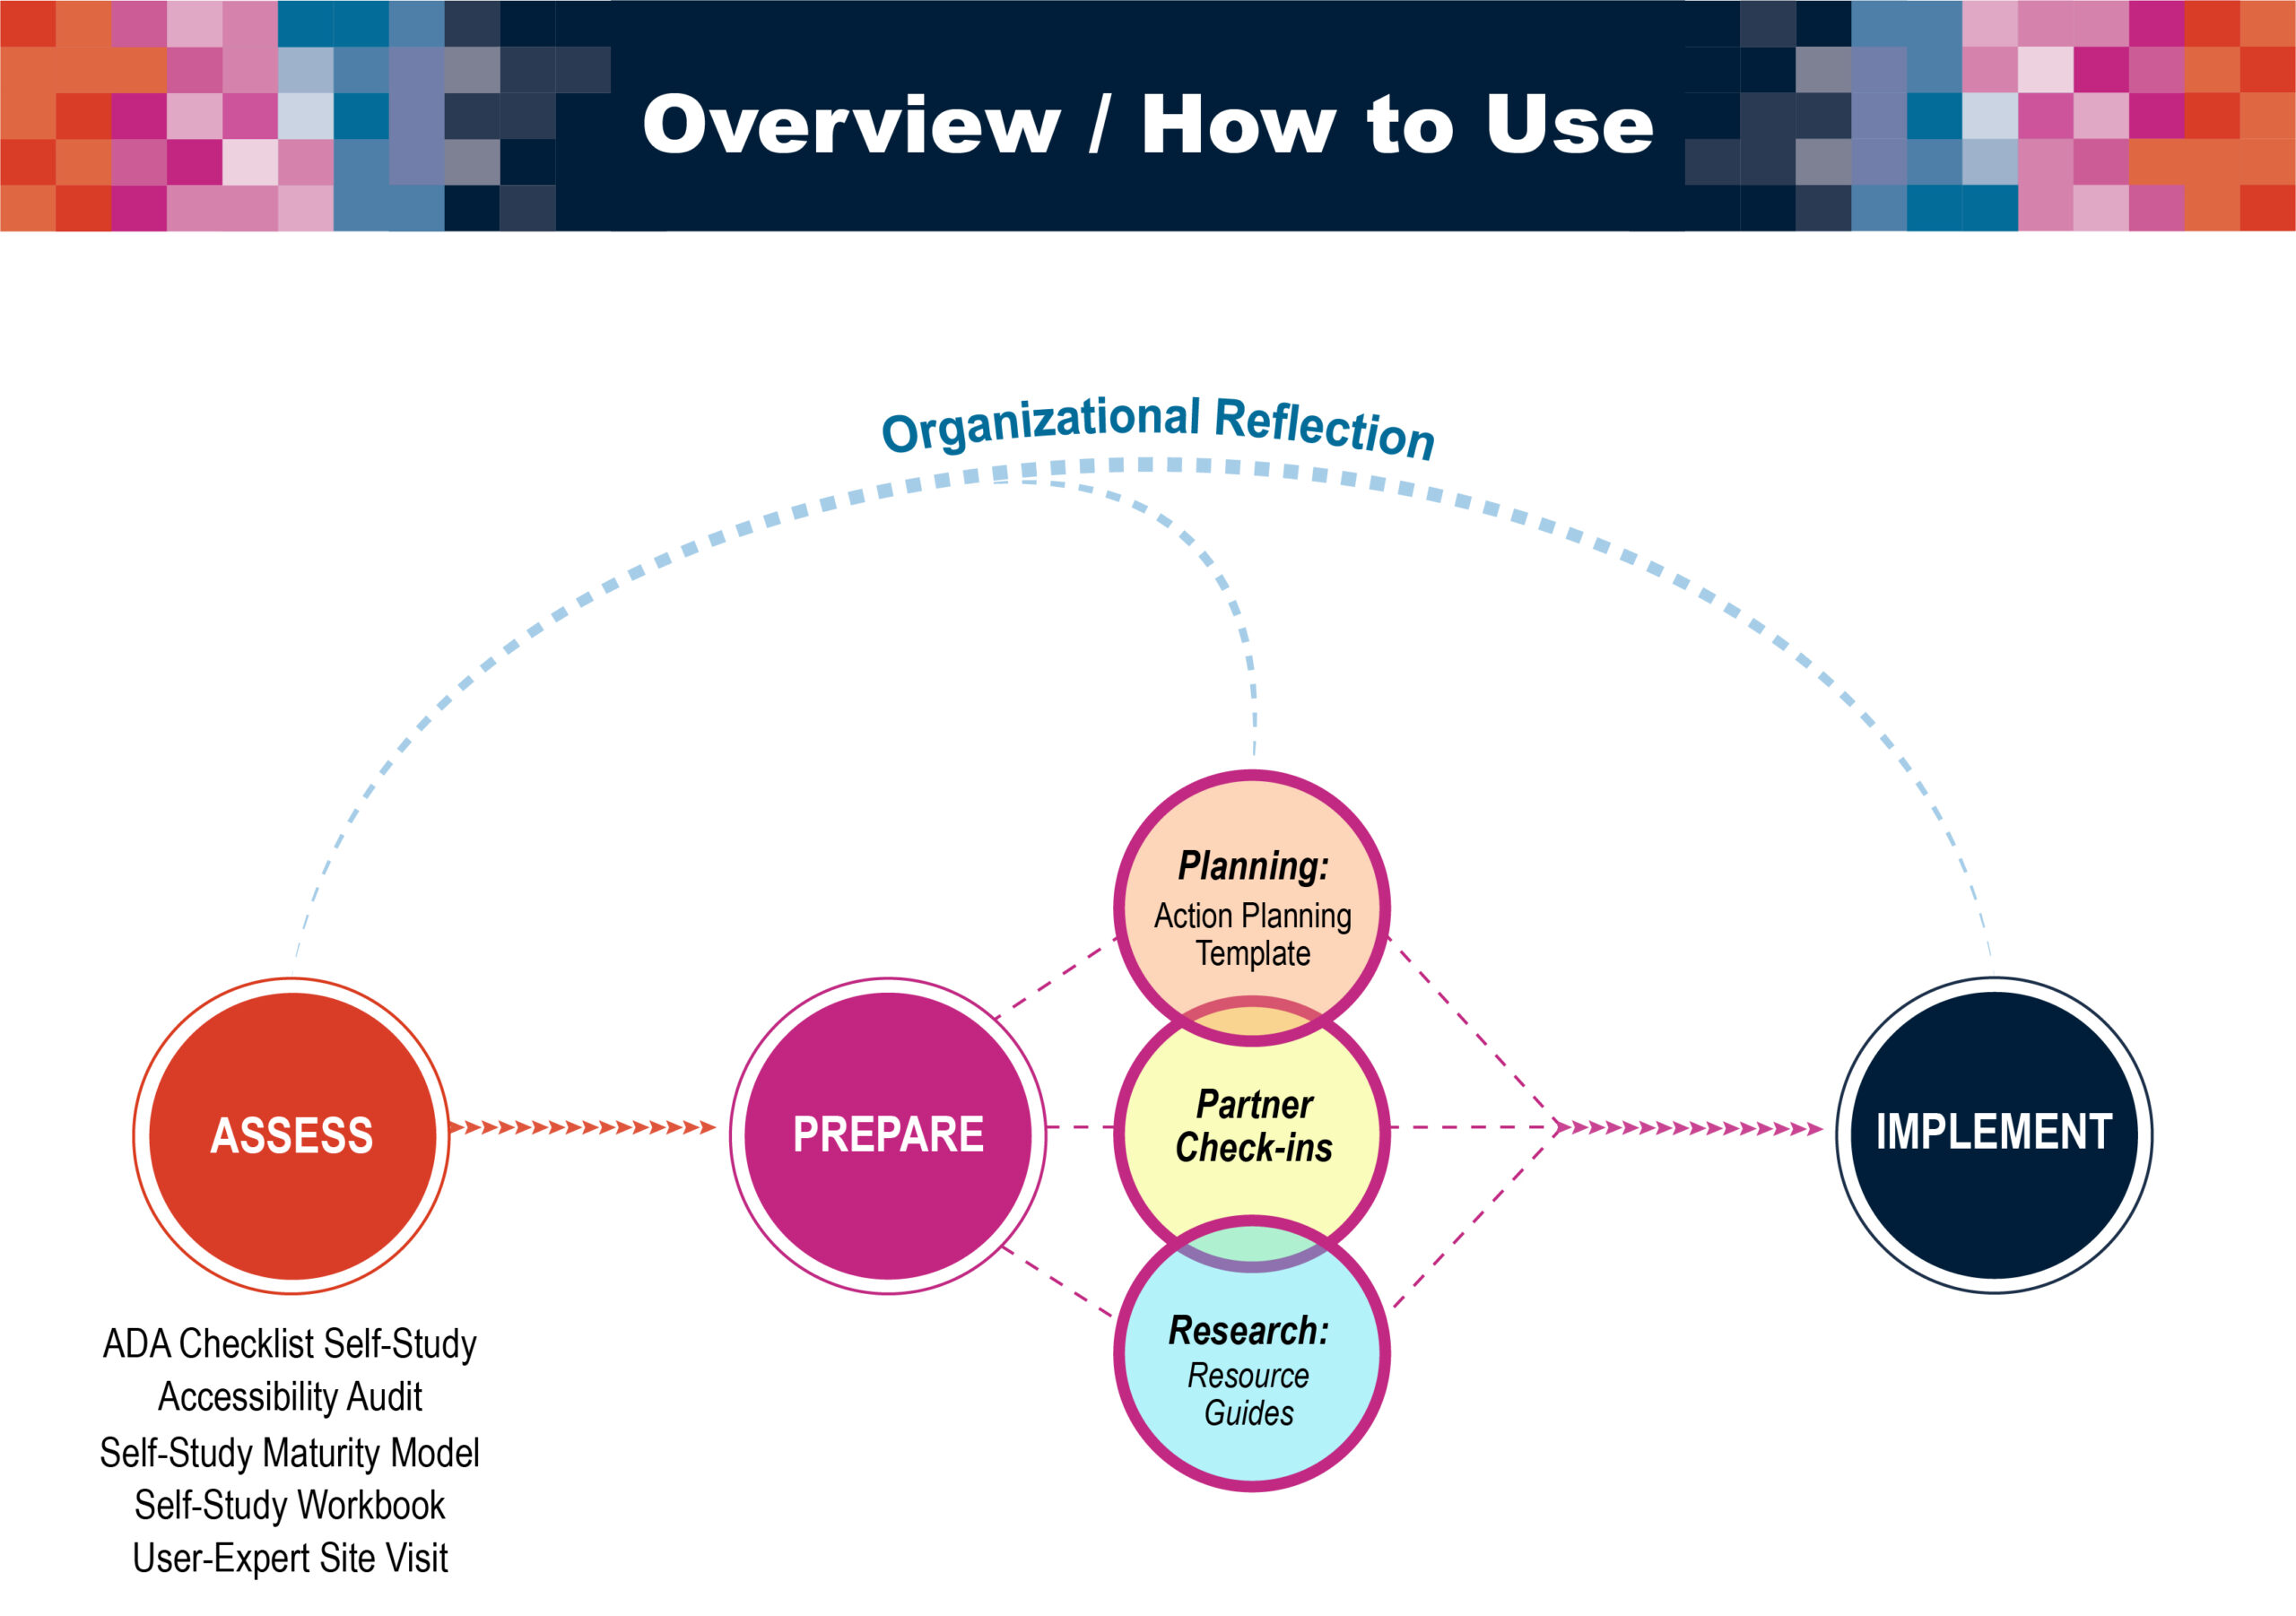 Graphic organizer, entitled “Overview / How to Use” and described below.